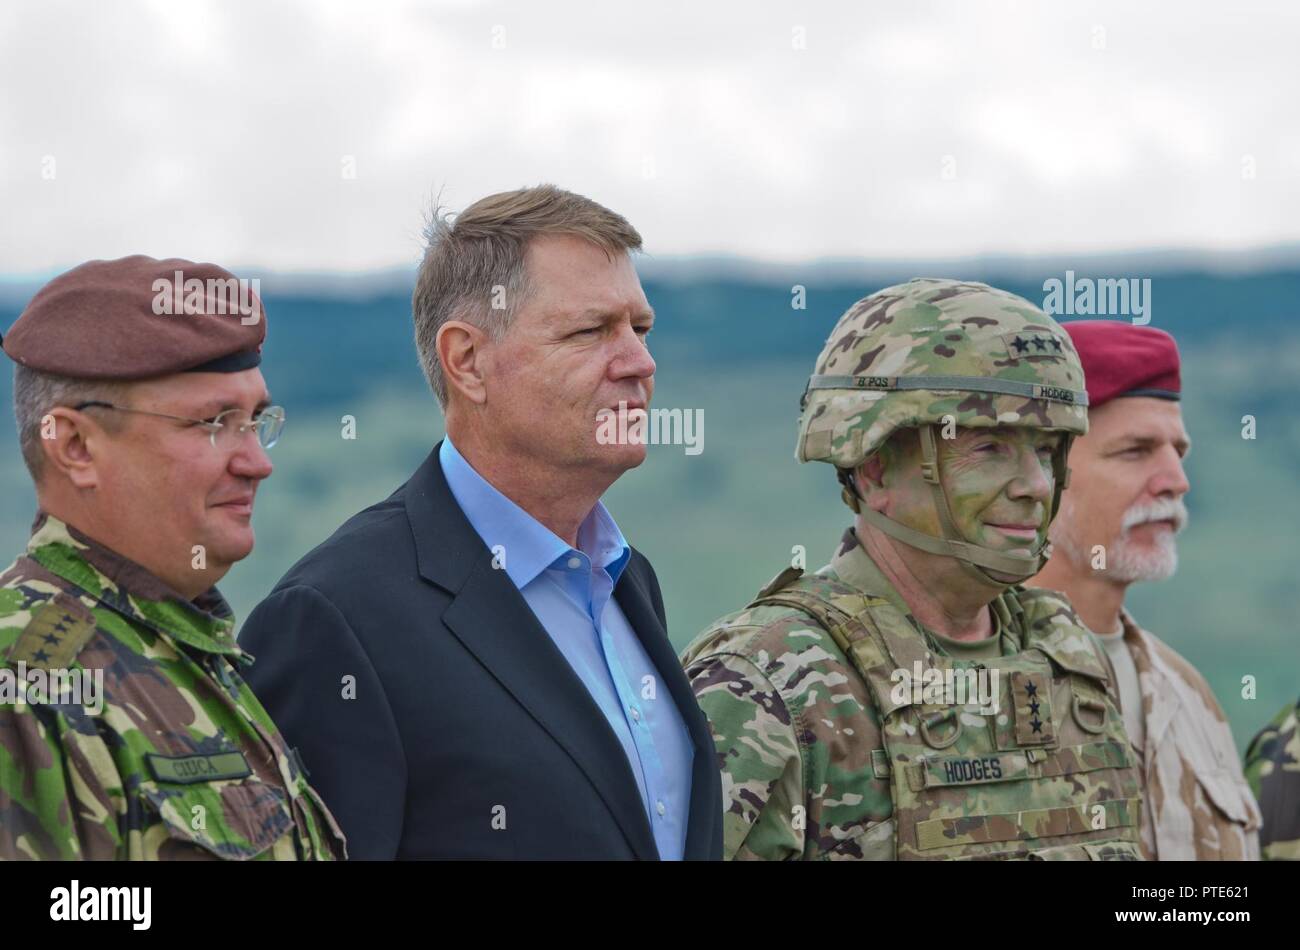 Romania President Klaus Iohannis stands next to U.S. Army Lt. Gen. Ben Hodges during the Distinguished Visitors Day for Getica Saber at the Joint National Training Center in Cincu, Romania, July 15, 2017. Getica Saber 17 is a U.S.-led fire support coordination exercise and combined arms live fire exercise that incorporates six Allied and partner nations with more than 4,000 Soldiers. Getica Saber 17 runs concurrent with Saber Guardian 17, a U.S. European Command, U.S. Army Europe-led multinational exercise that spans across Bulgaria, Hungary and Romania with more than 25,000 service members fr Stock Photo